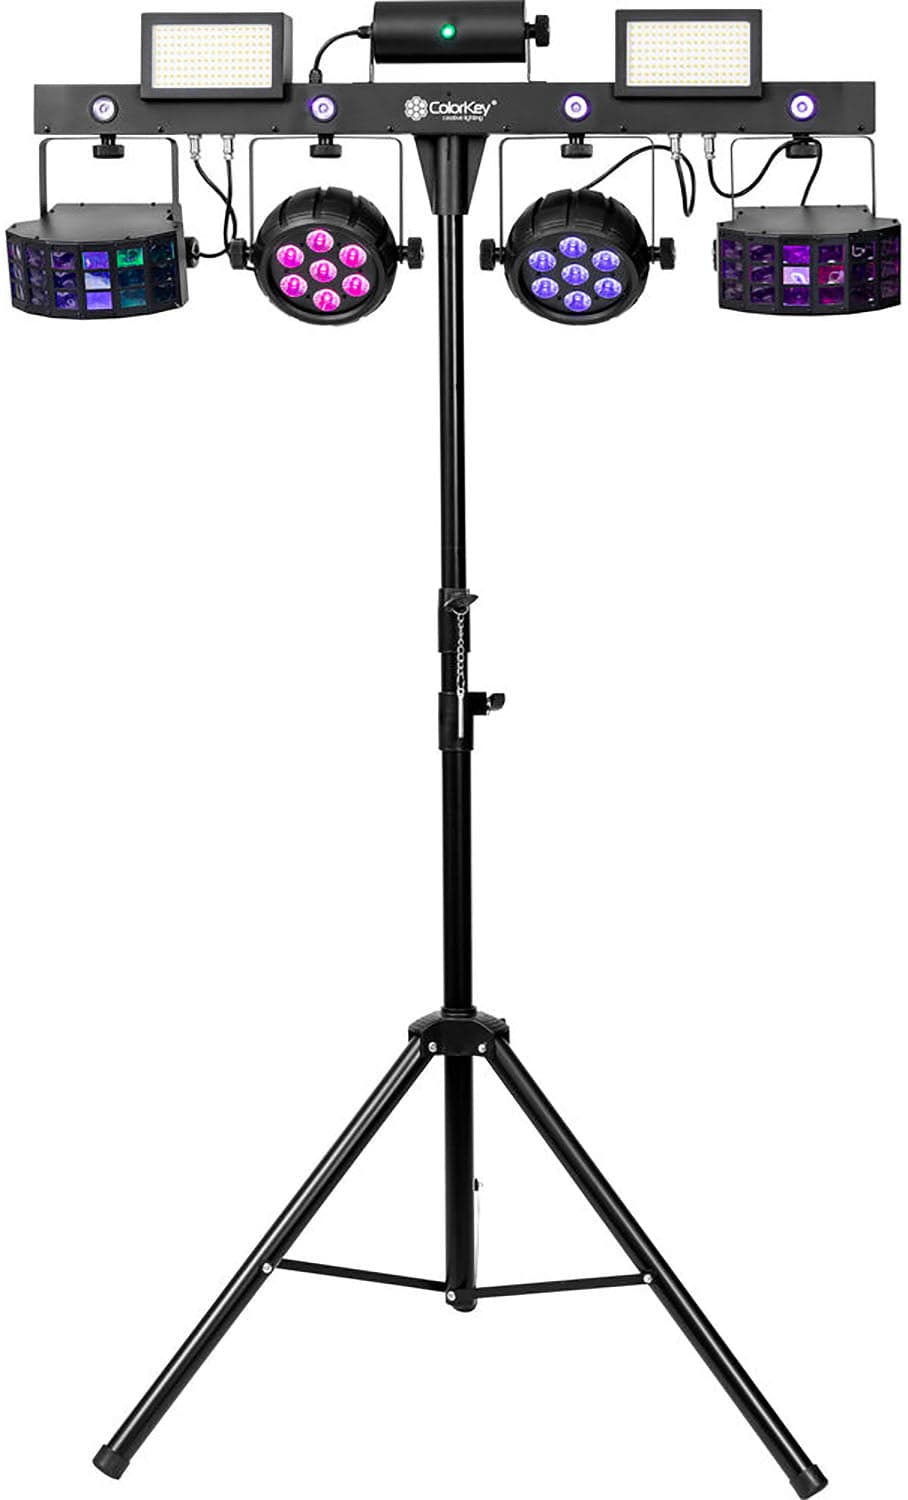 ColorKey CKU-3100 PartyBar Pro 1000 Multi-Effect Lighting System - PSSL ProSound and Stage Lighting